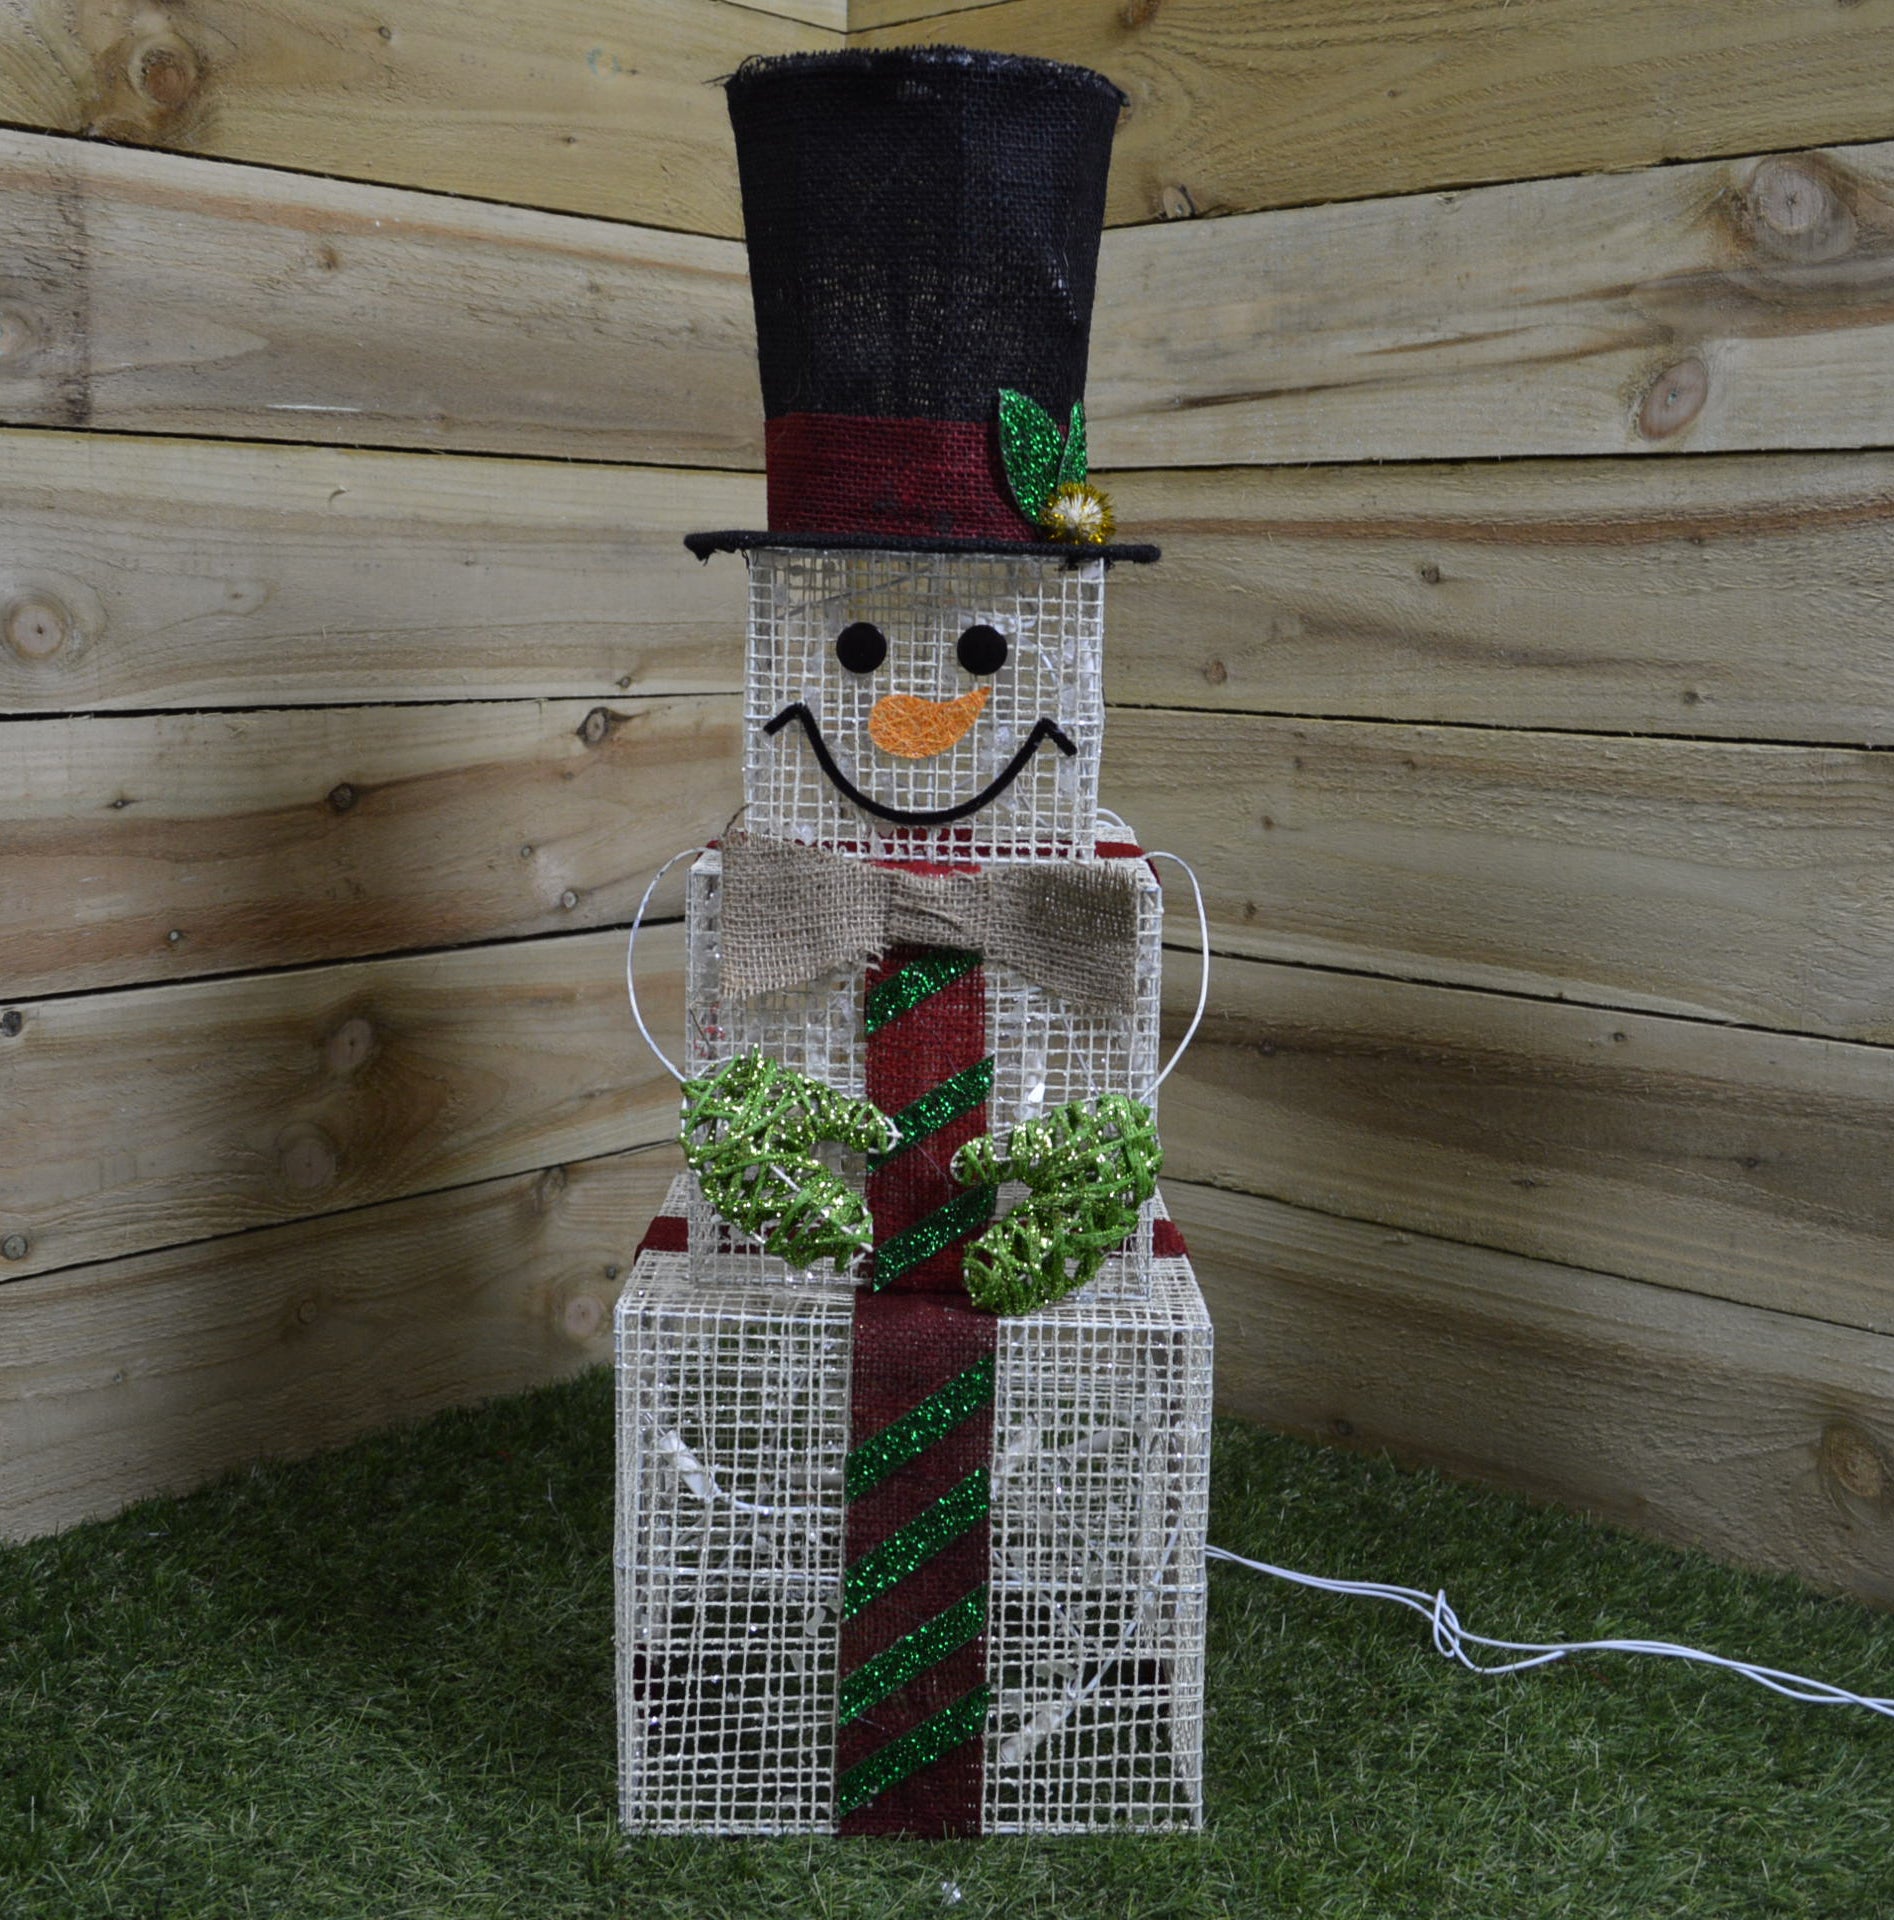 75cm Battery Operated Lit Snowman Christmas Decoration with Warm White LEDs